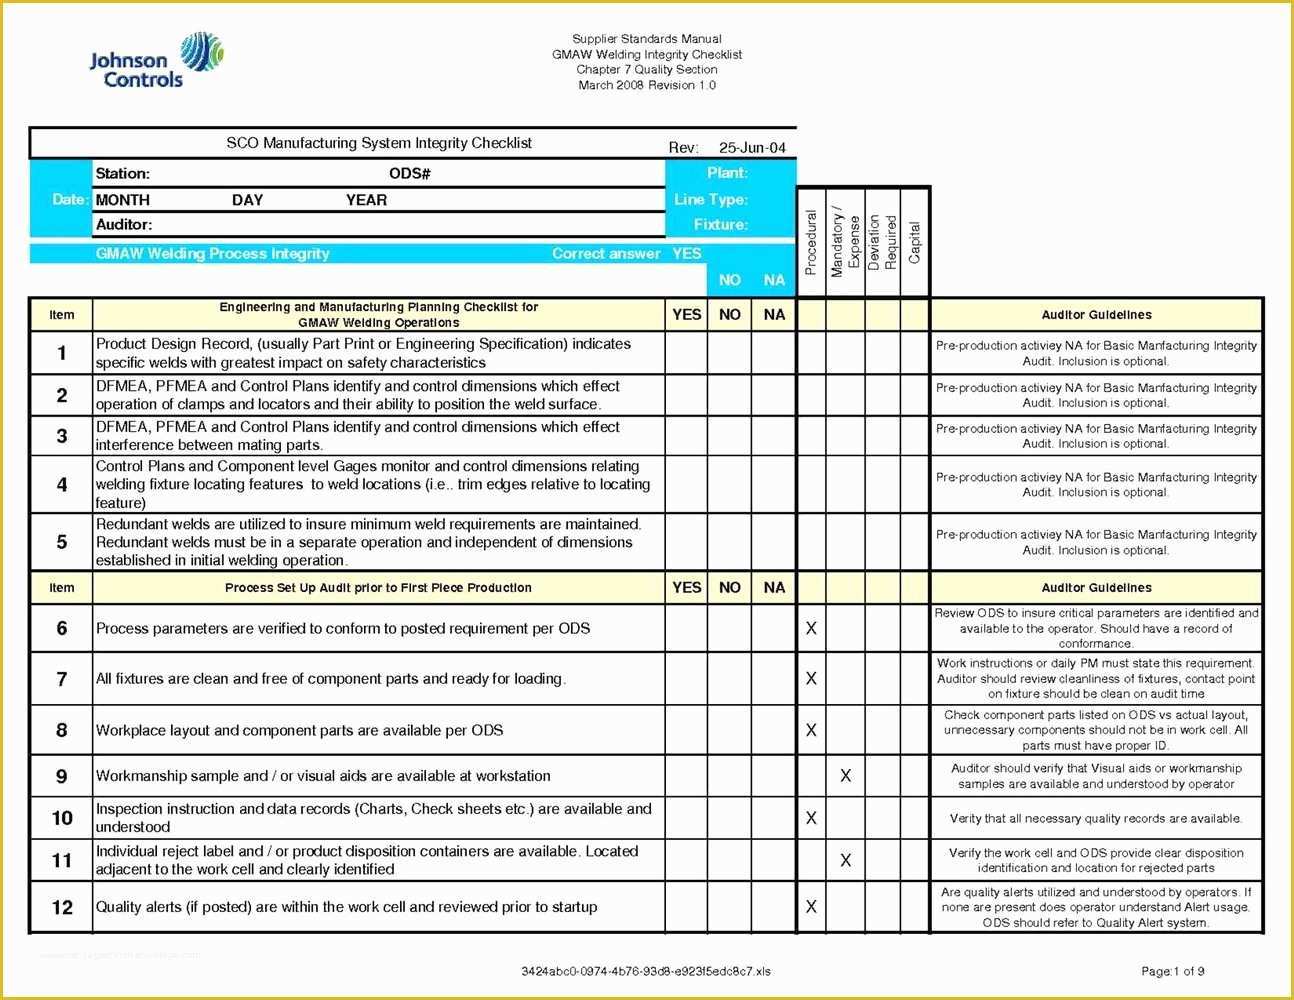 Iso 9001 Templates Free Download Of 98 iso 9001 Blank Sample forms for All the Departments 28